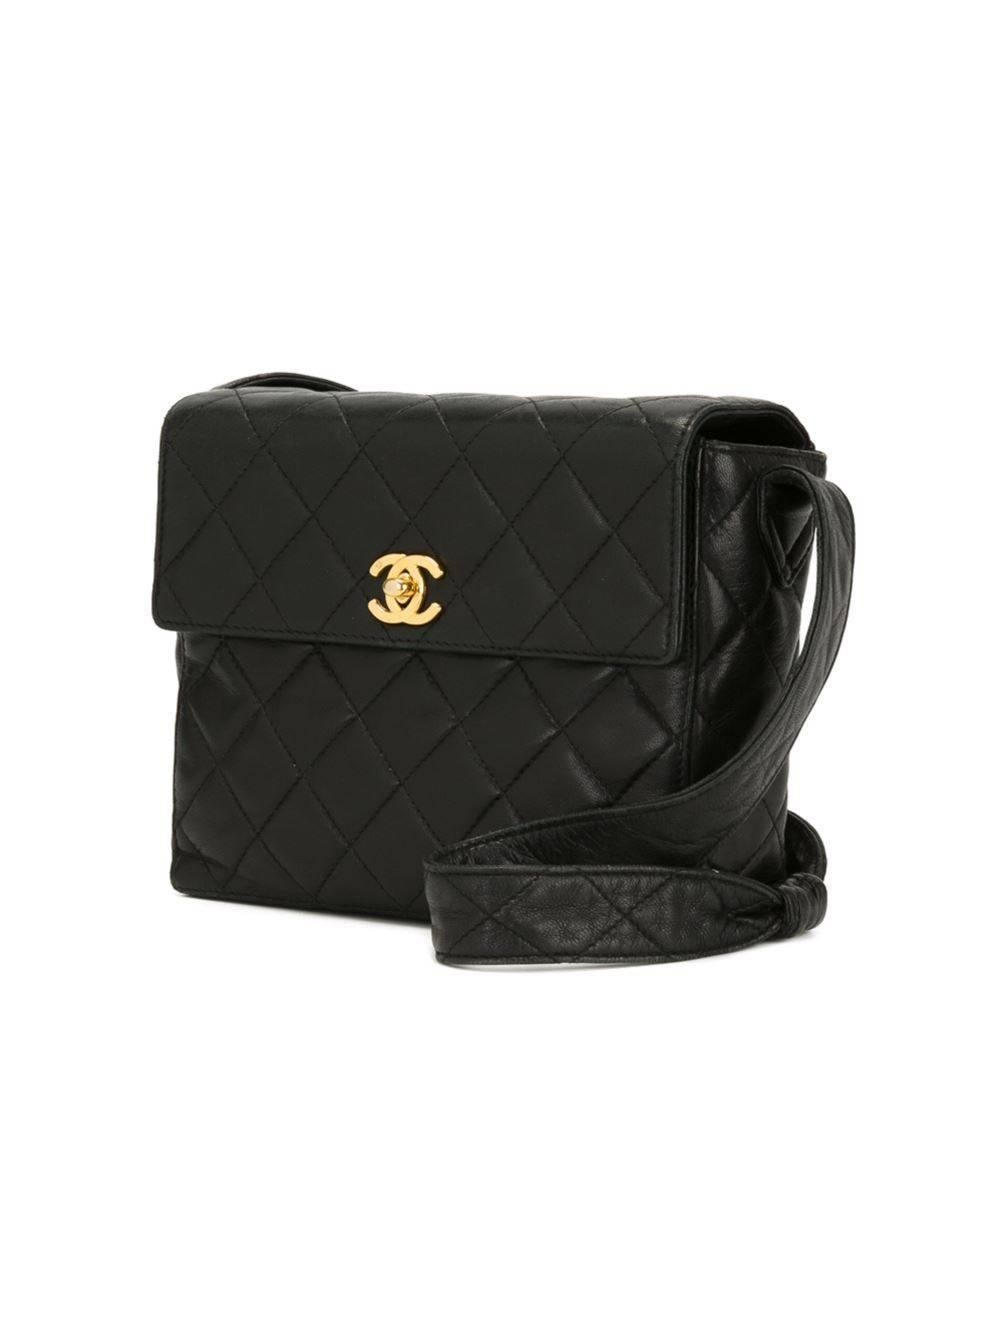 Vintage black leather quilted shoulder bag featuring foldover top with twist-lock closure, gold-tone hardware, a shoulder strap, a back slip pocket, an internal mirror, an internal zipped pocket, an internal slip pocket and an internal logo